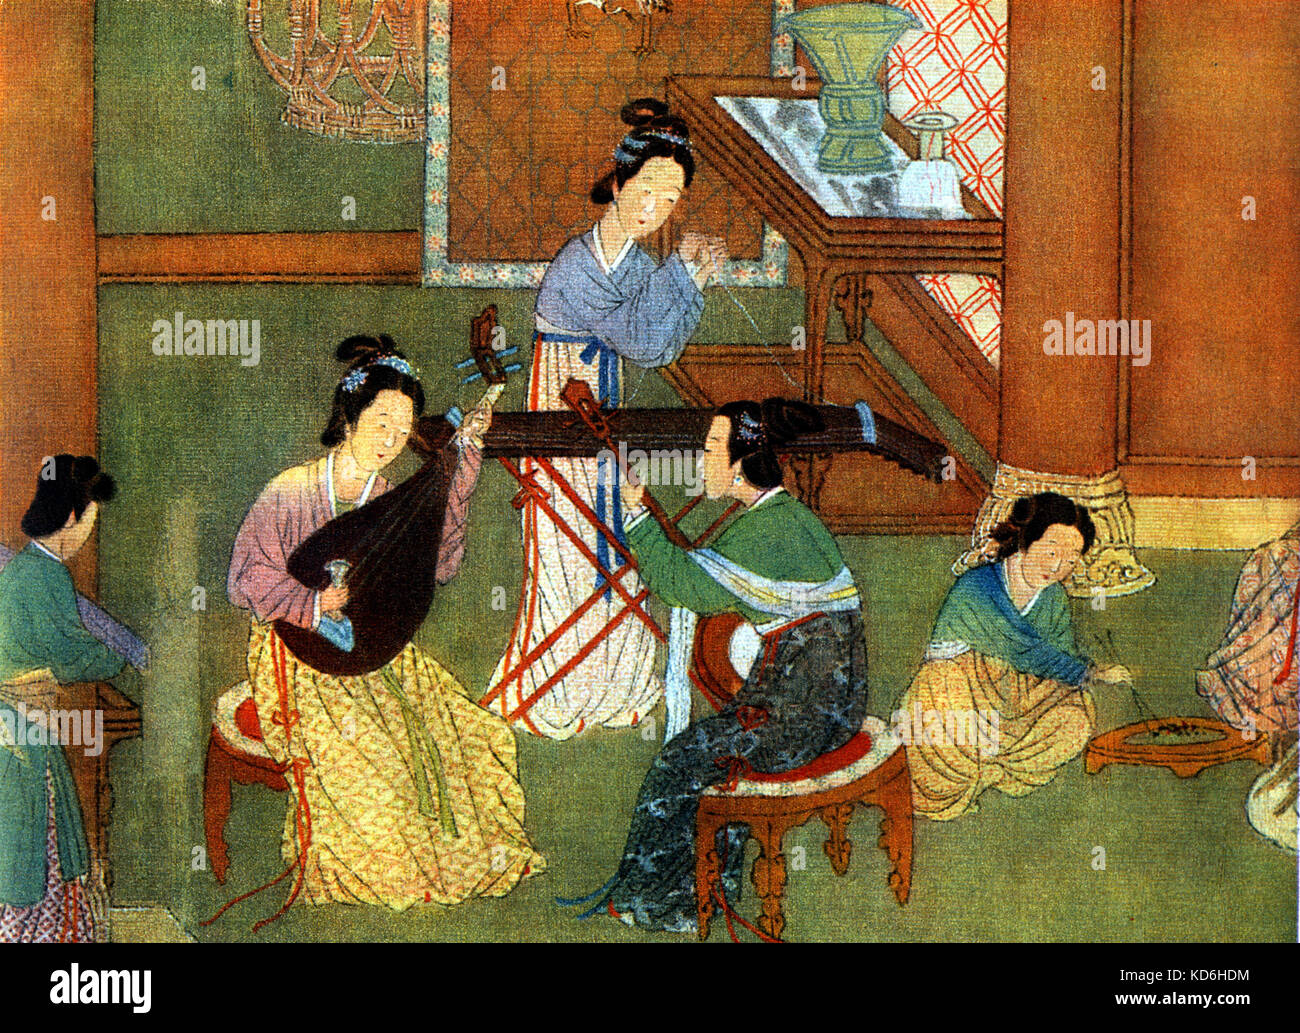 Chinese music ensemble from left to right: Pipa (lute) player, Gu Qin (zither) player, Yueh Qin (moon guitar) player. Stock Photo